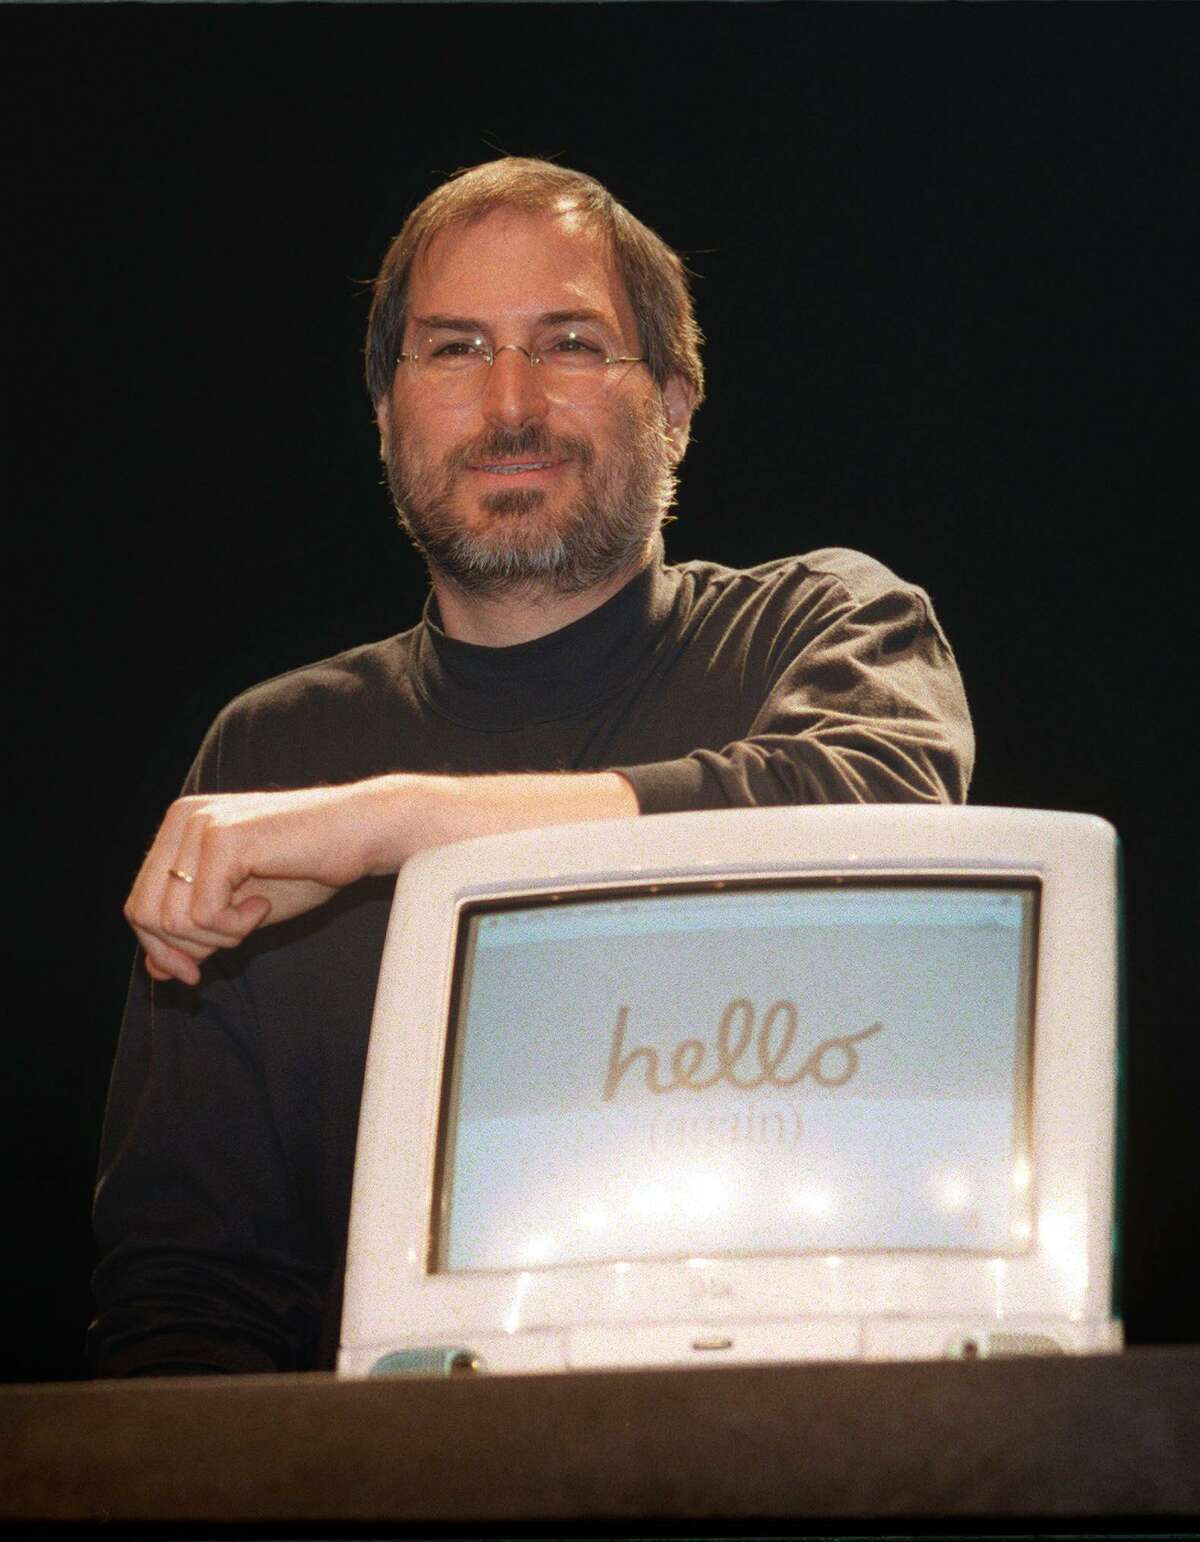 In this file photo taken on September 17, 1998, Steve Jobs, CEO of Apple, gives a press conference, part of the annual fair "Apple Expo", at the Porte de Versailles in Paris, where he came to promote the latest creation of the American computer Group, the personal computer iMac. Apple -- the culture-changing company behind the iPod, iPhone and iPad -- hit another milestone on Thursday, August 2, 2018, becoming the first private-sector company to surpass $1 trillion in market value. Shares of Apple hit $207.91 in afternoon trading on Wall Street, allowing it to hit the magic number two days after the California tech giant reported strong quarterly earnings. The landmark is the latest victory for Tim Cook, who faced skepticism when he took over as chief executive in 2011 from ailing iconic co-founder Steve Jobs.